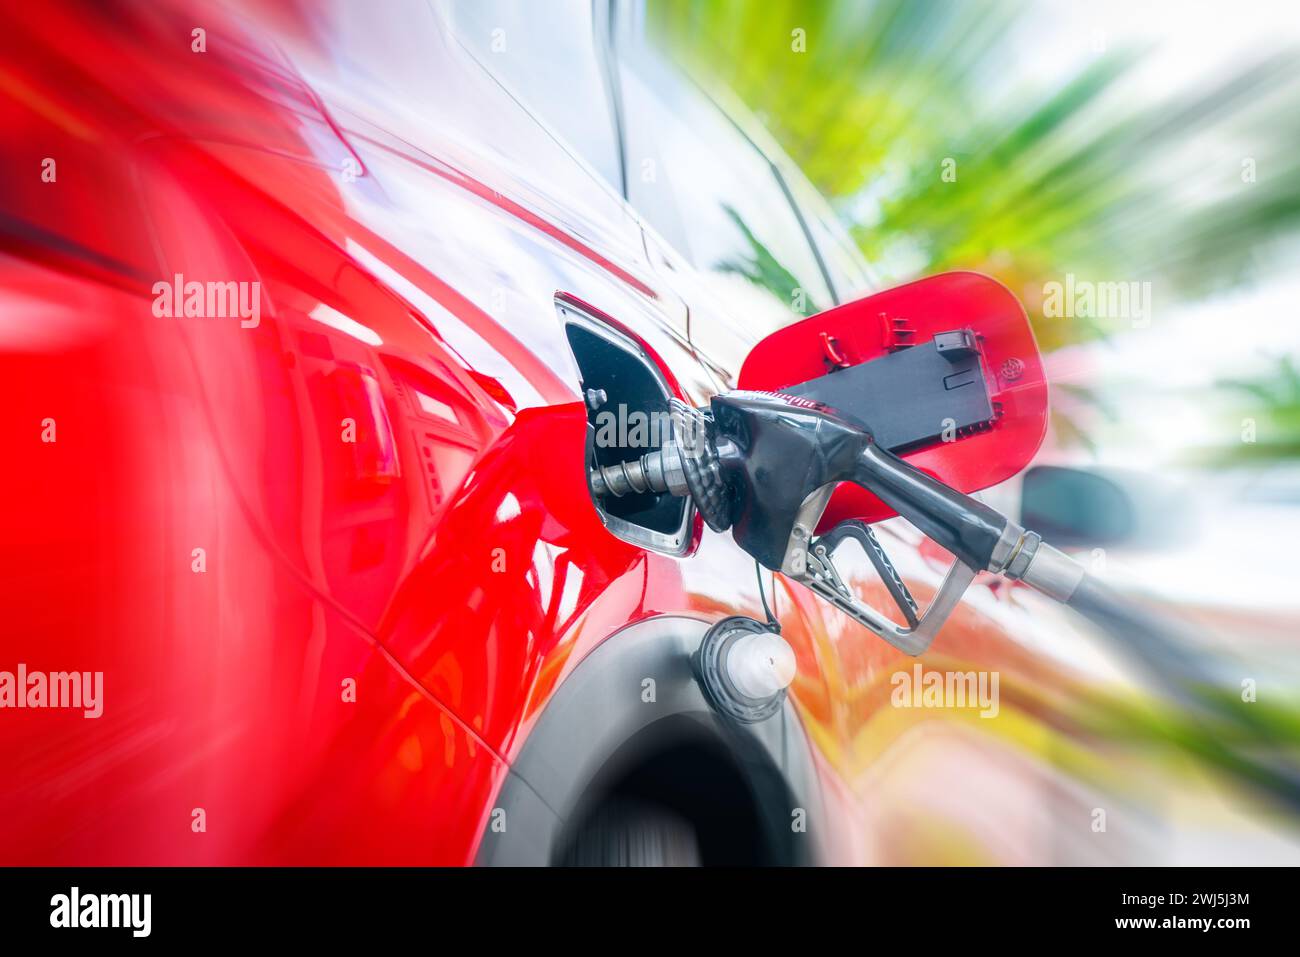 Car refueling on petrol station. Fuel pump with gasoline. Service is filling gas or diesel into tank with motion blur effect Stock Photo